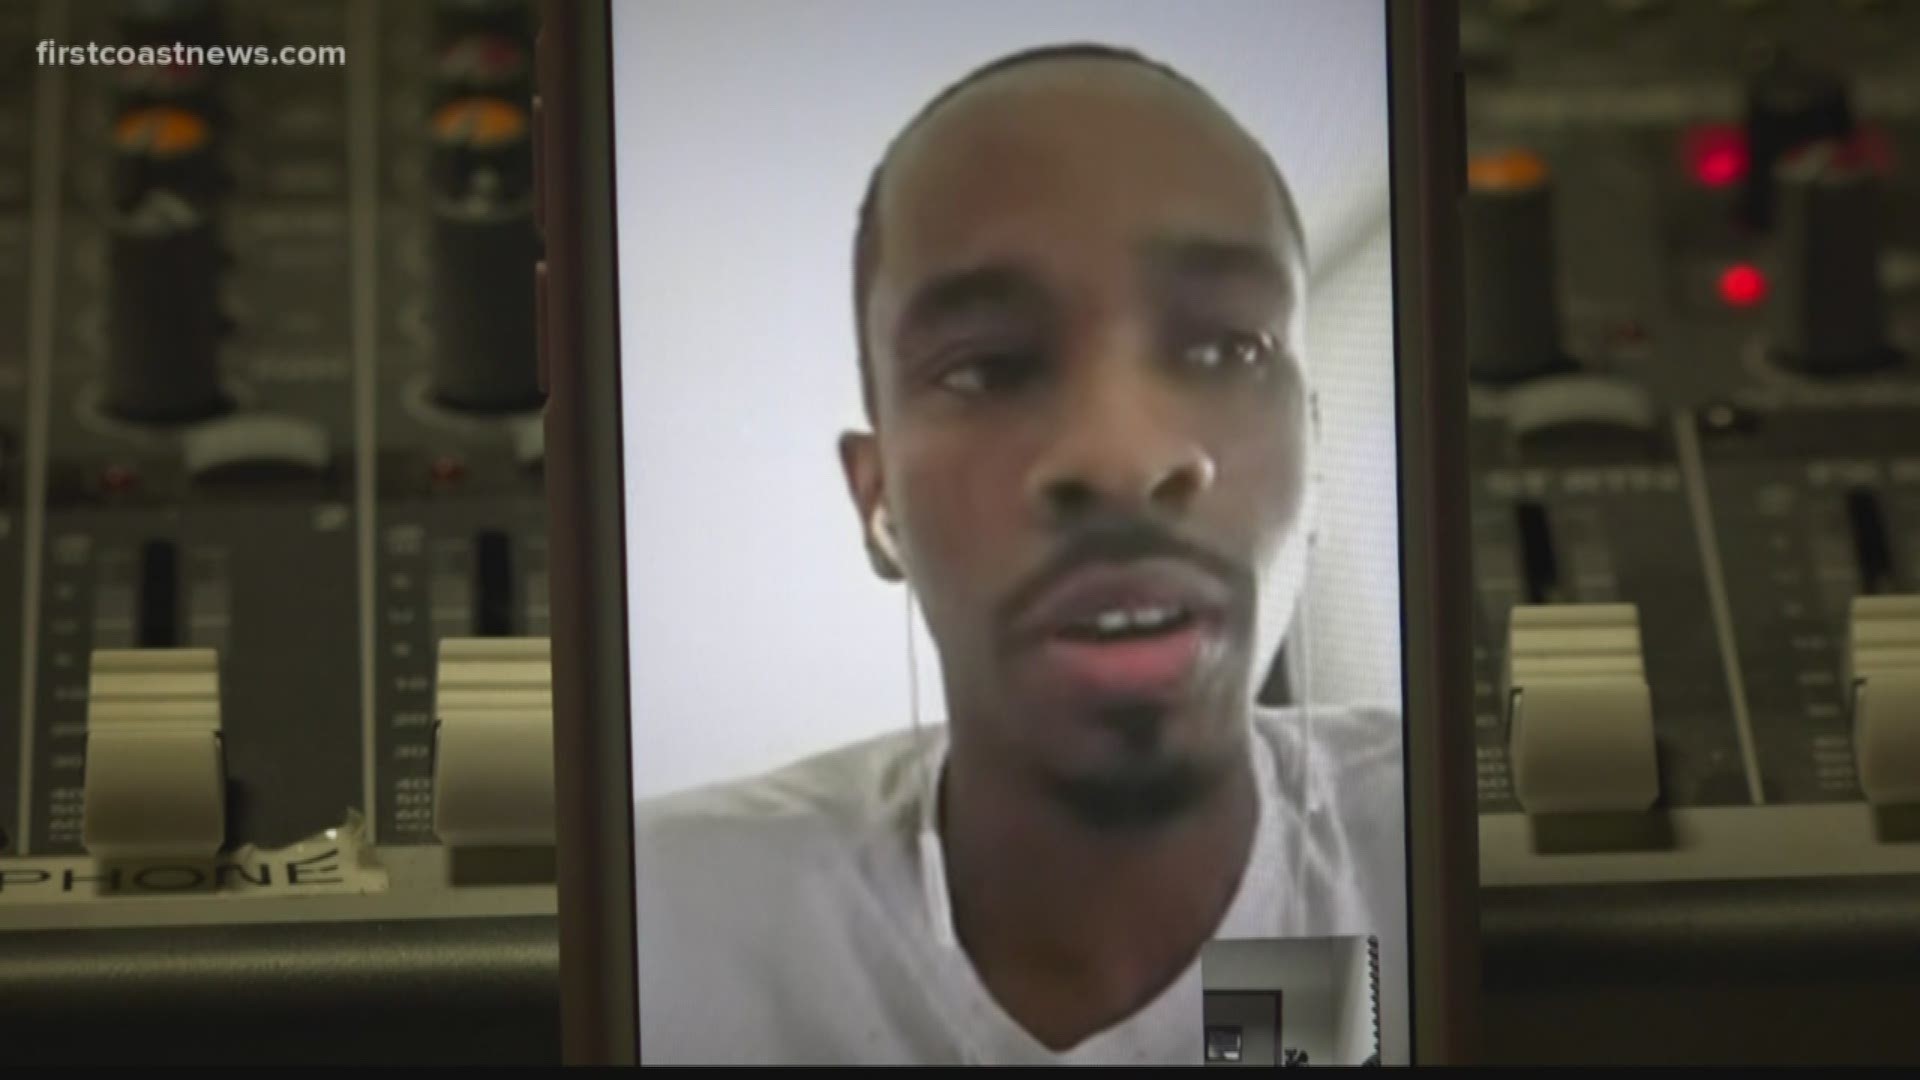 Reginald Brown told First Coast News he was the one who defeated the shooter, David Katz, just before the shooting began.